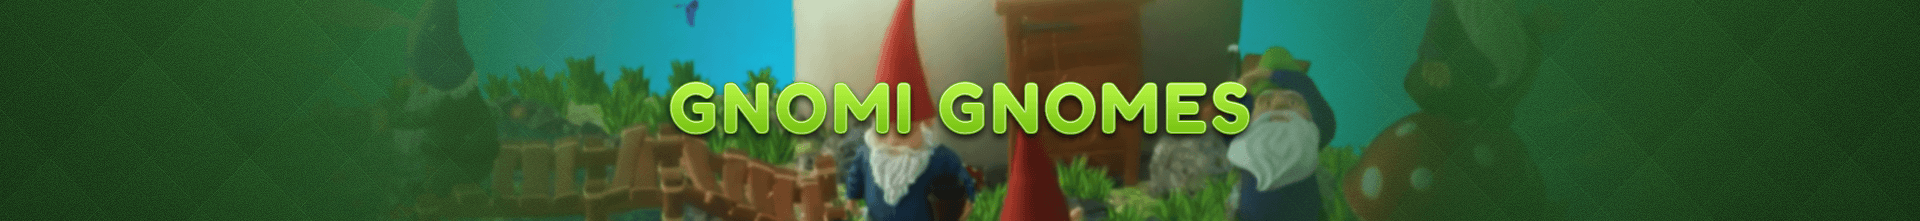 Gnomes by Gnomi